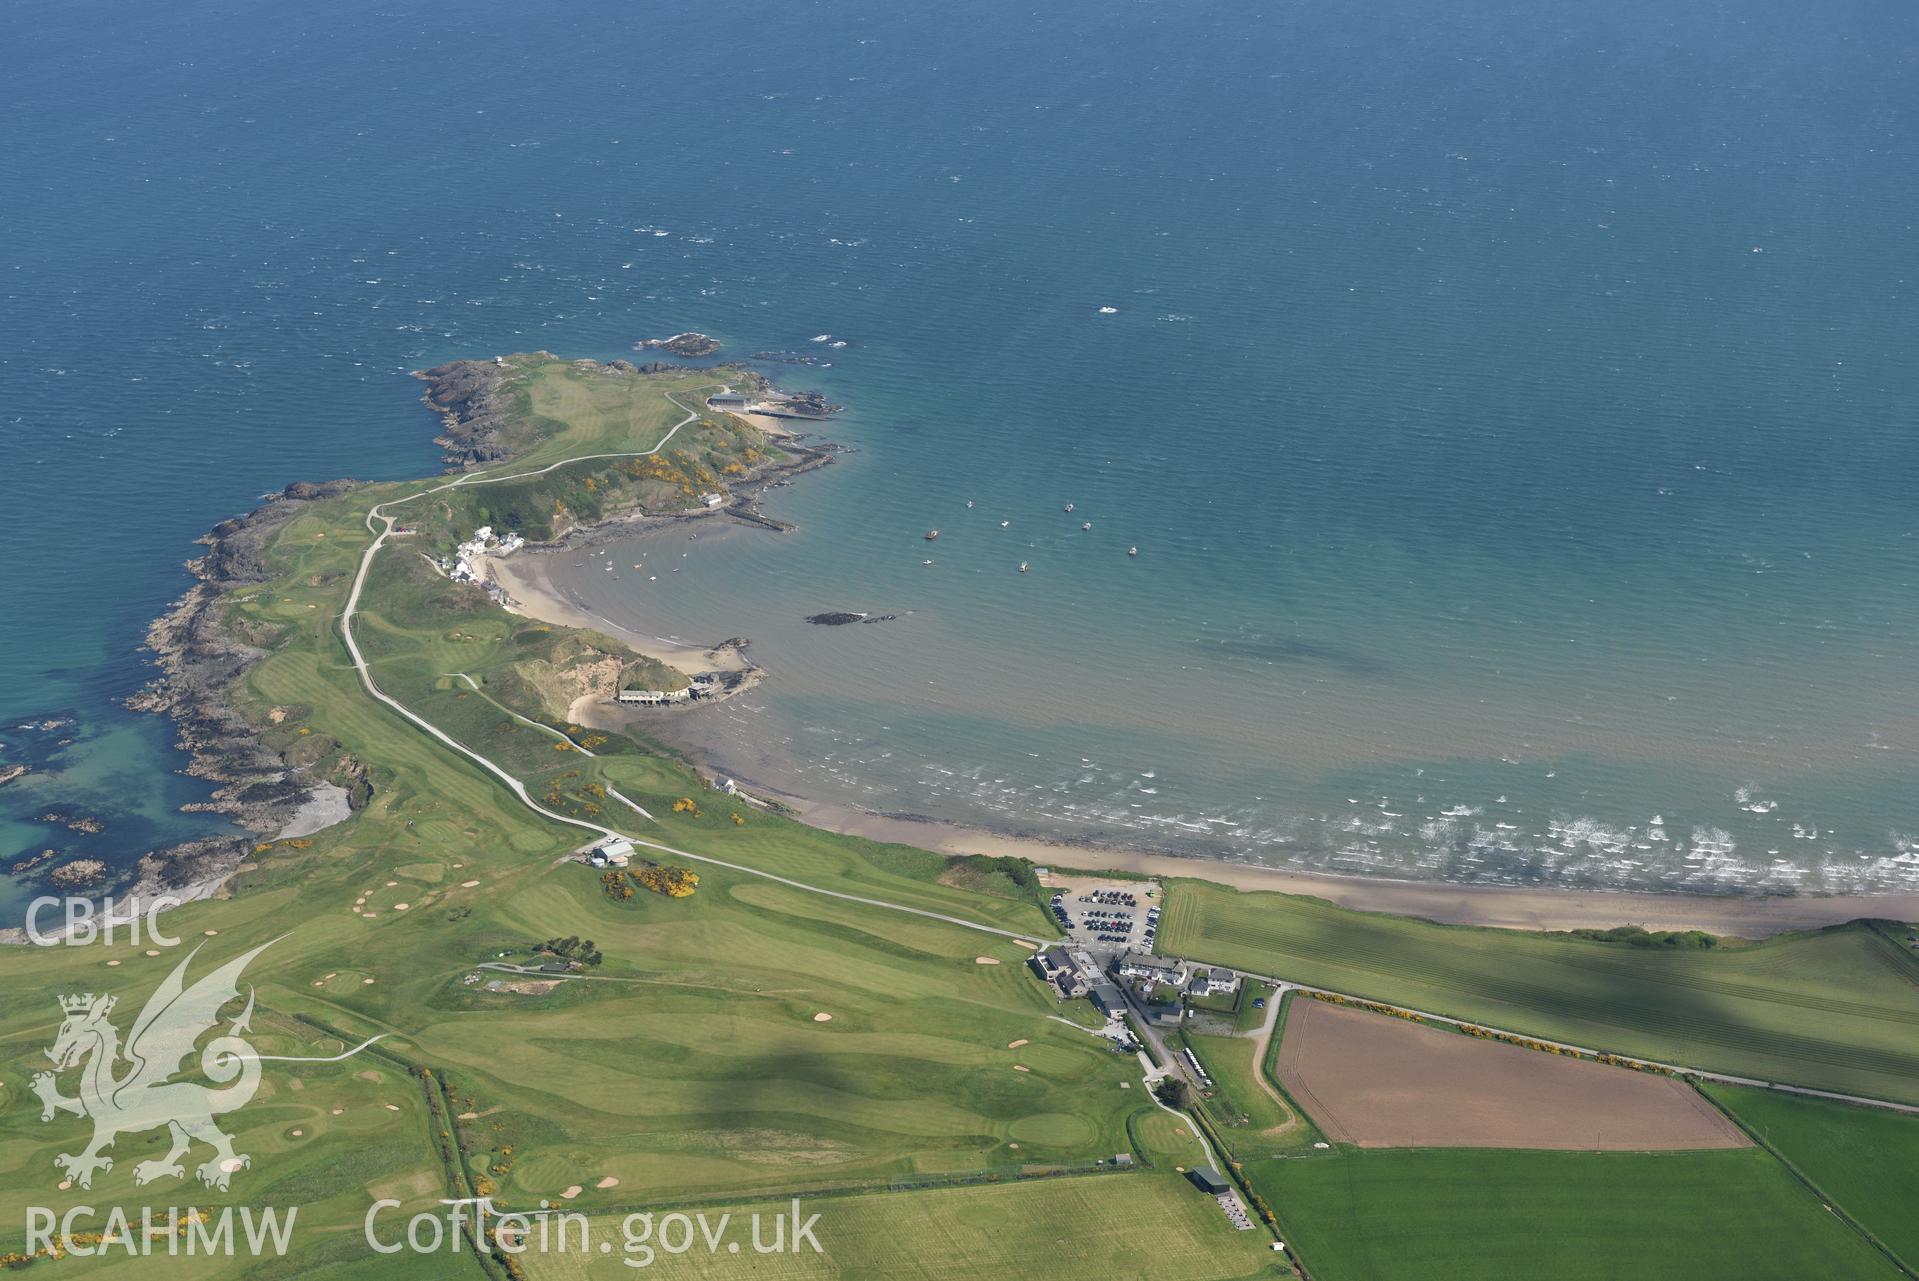 Aerial photography of Trwyn Porth Dinllaen taken on 3rd May 2017.  Baseline aerial reconnaissance survey for the CHERISH Project. ? Crown: CHERISH PROJECT 2017. Produced with EU funds through the Ireland Wales Co-operation Programme 2014-2020. All material made freely available through the Open Government Licence.